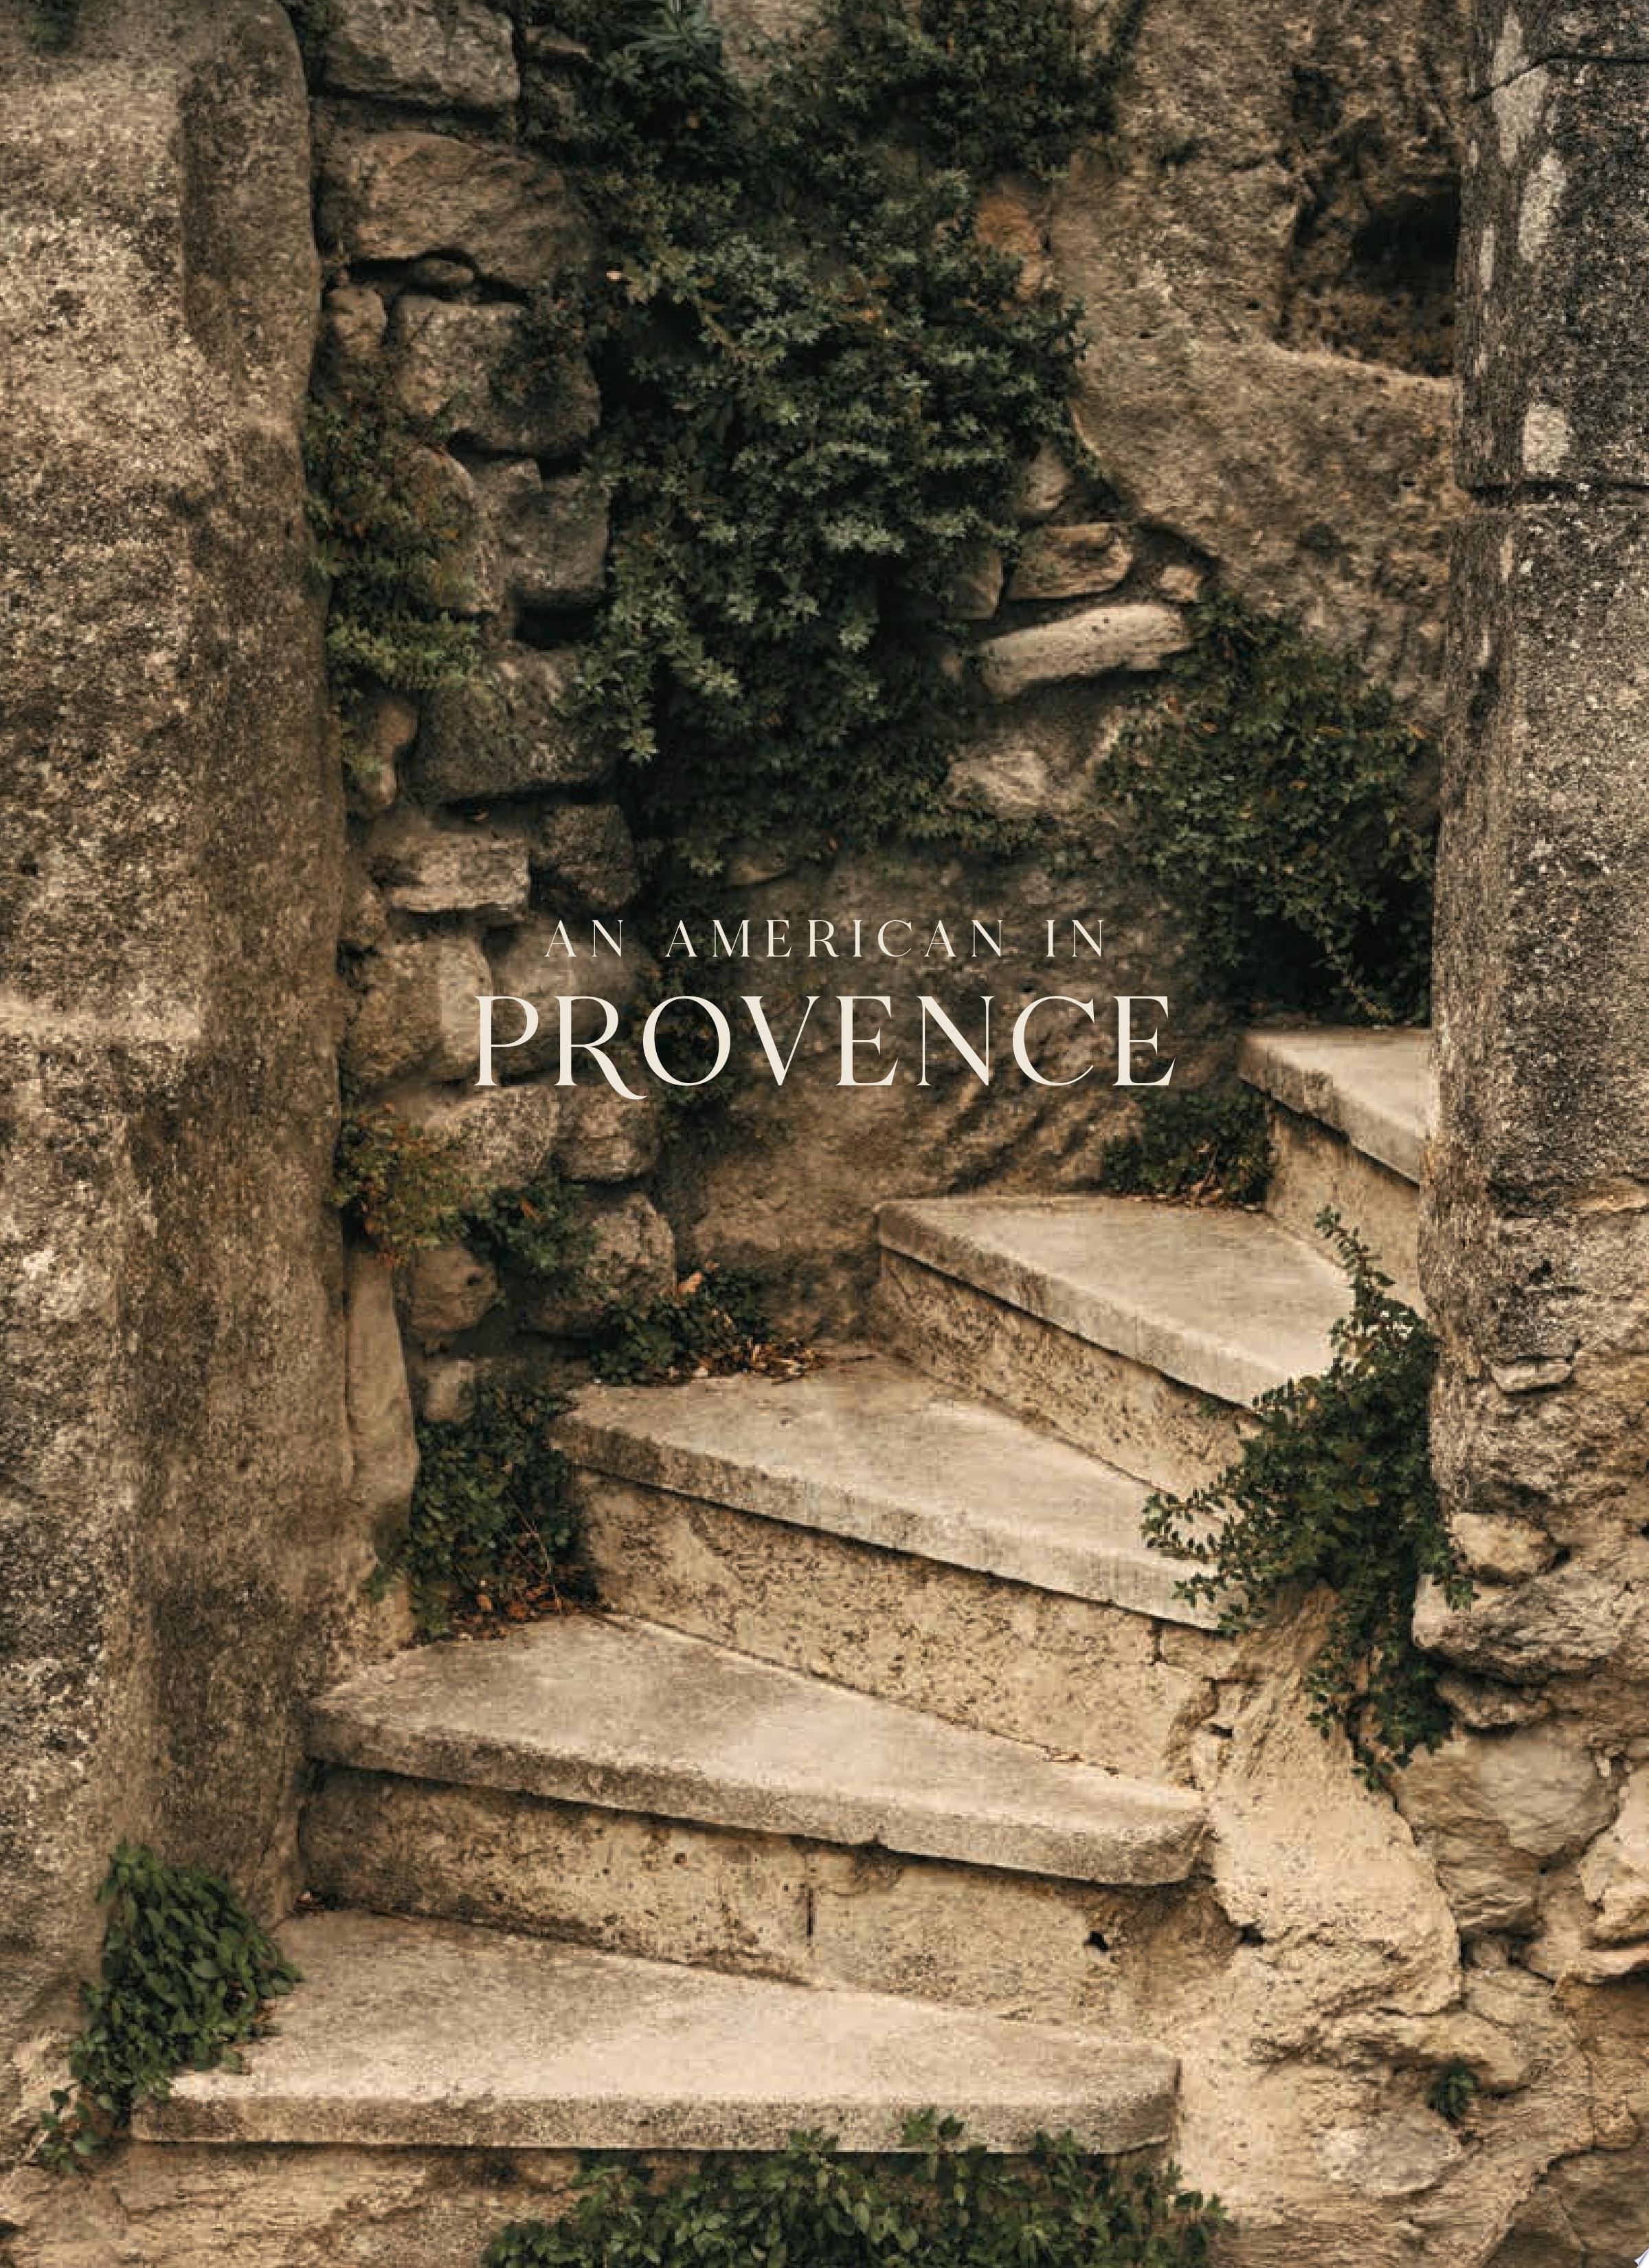 Image for "An American in Provence"